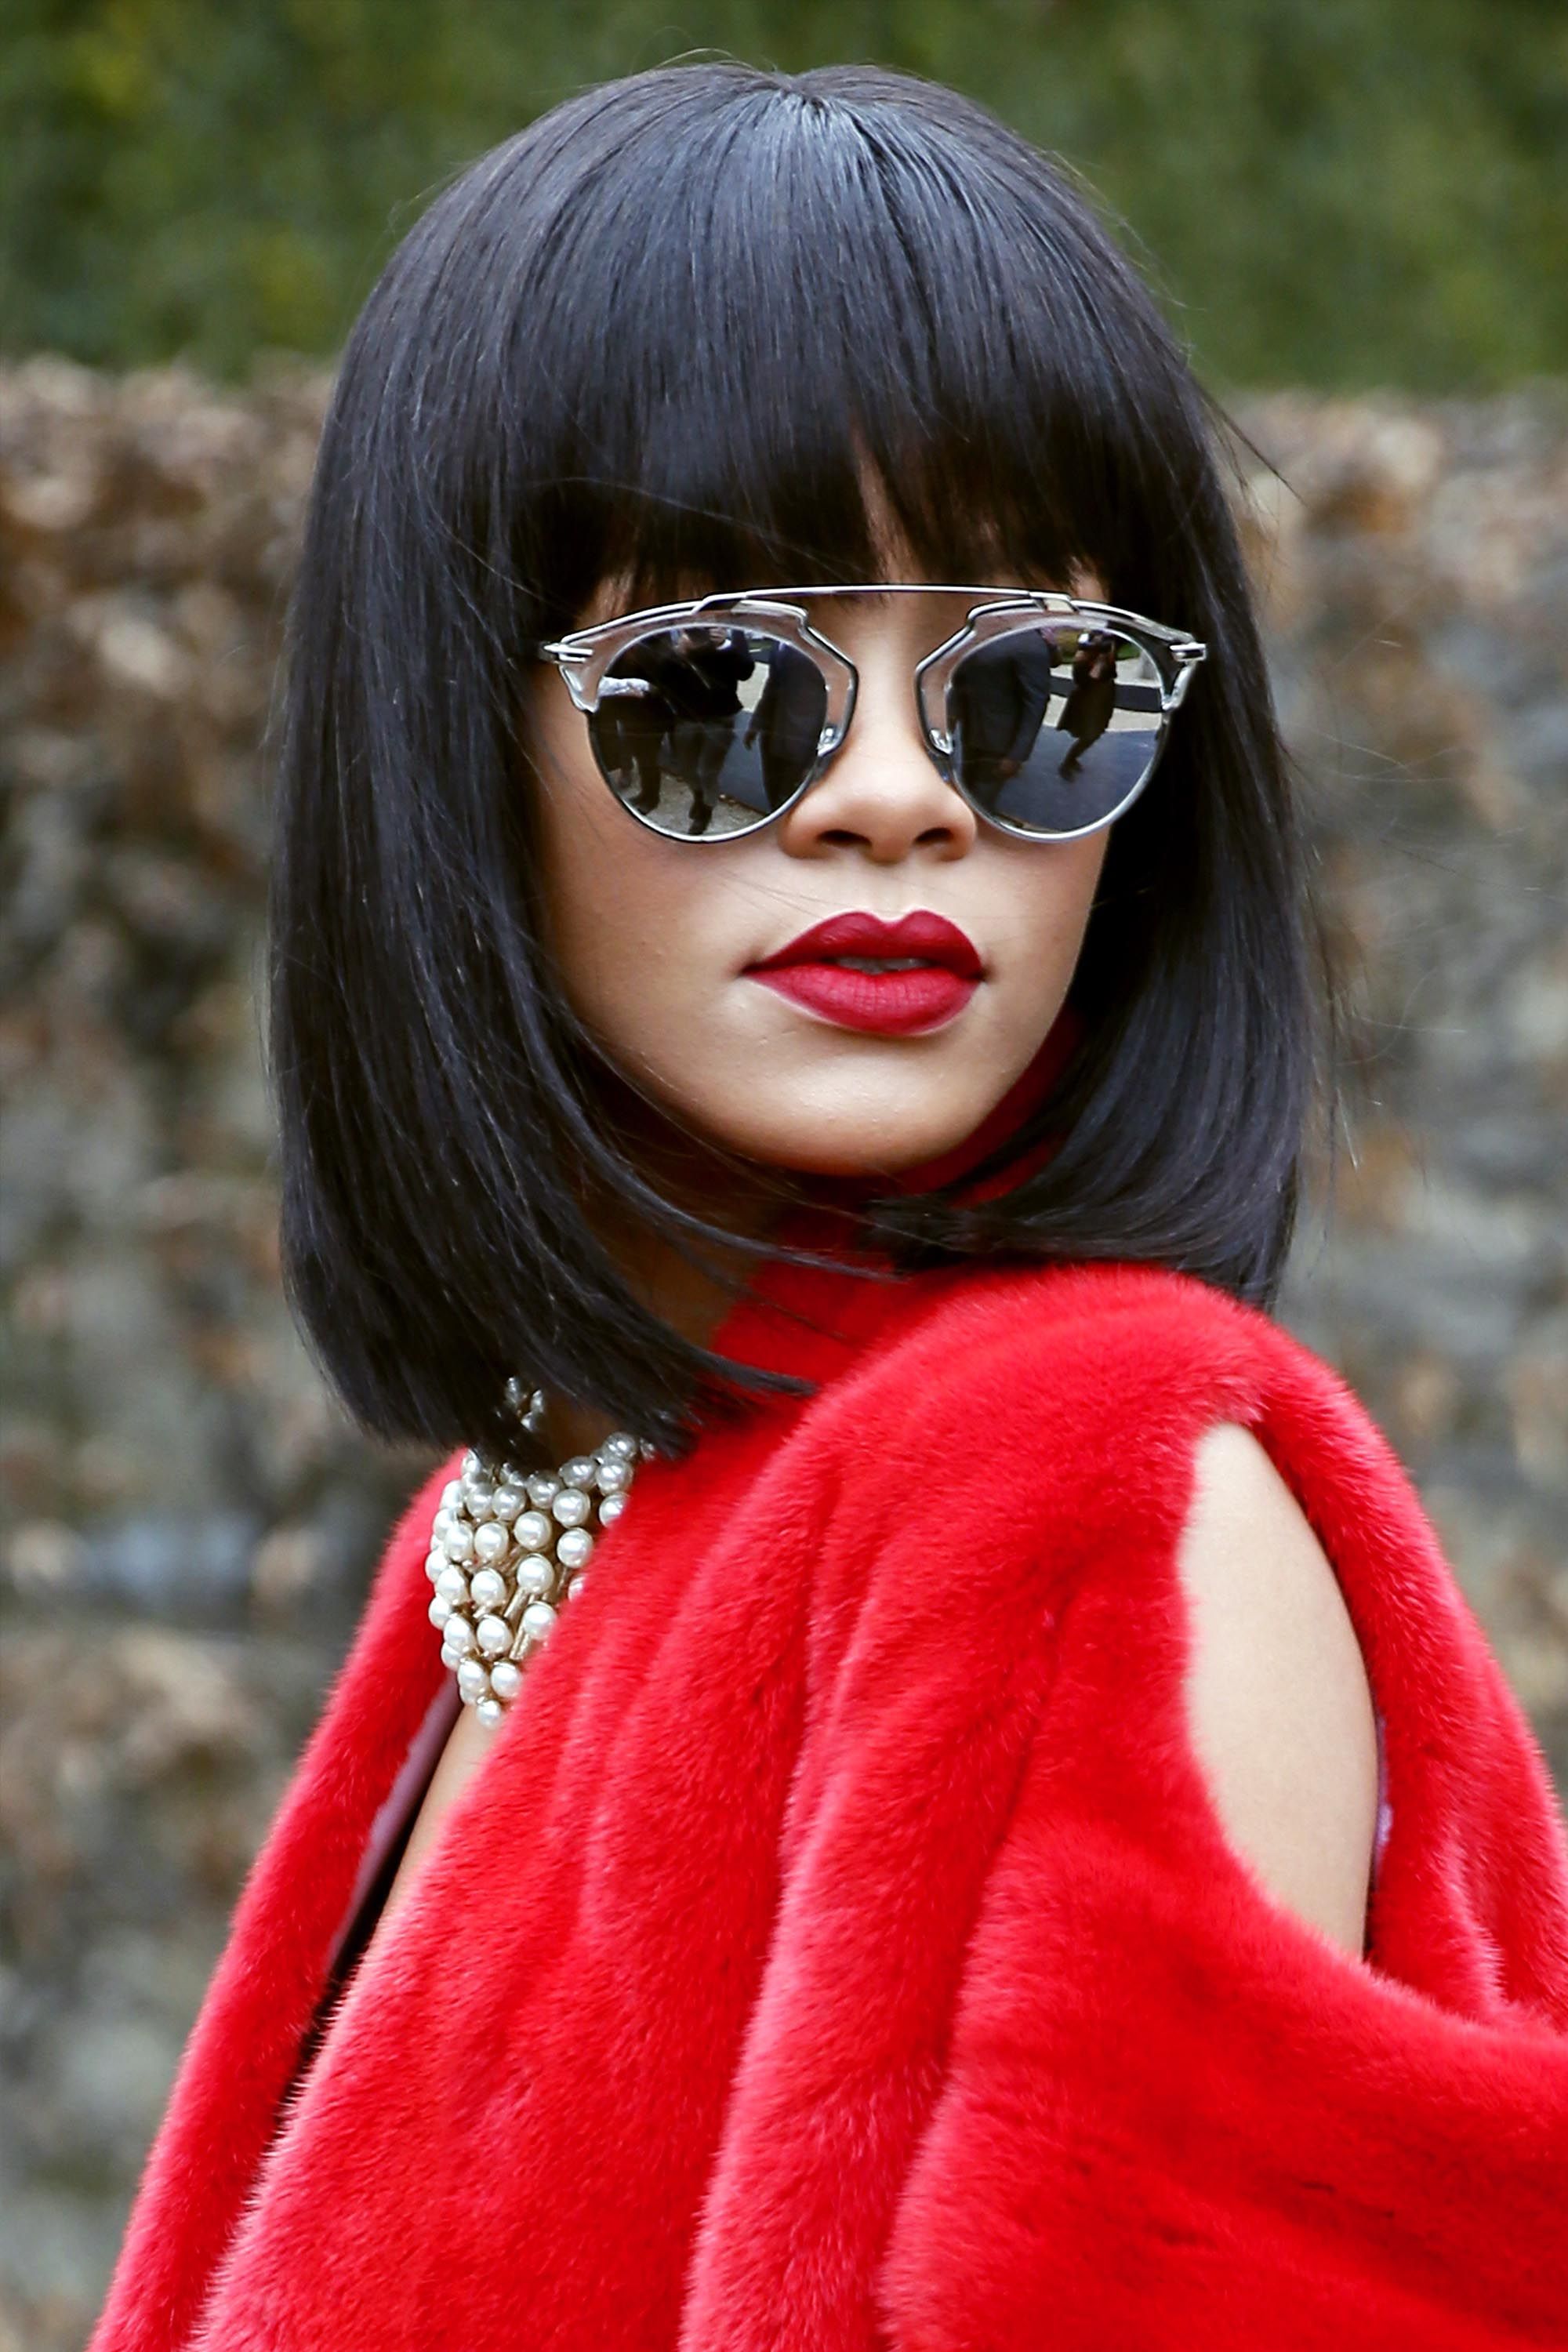 50 Best Rihanna Hairstyles Our Favorite Rihanna Hair Looks Of